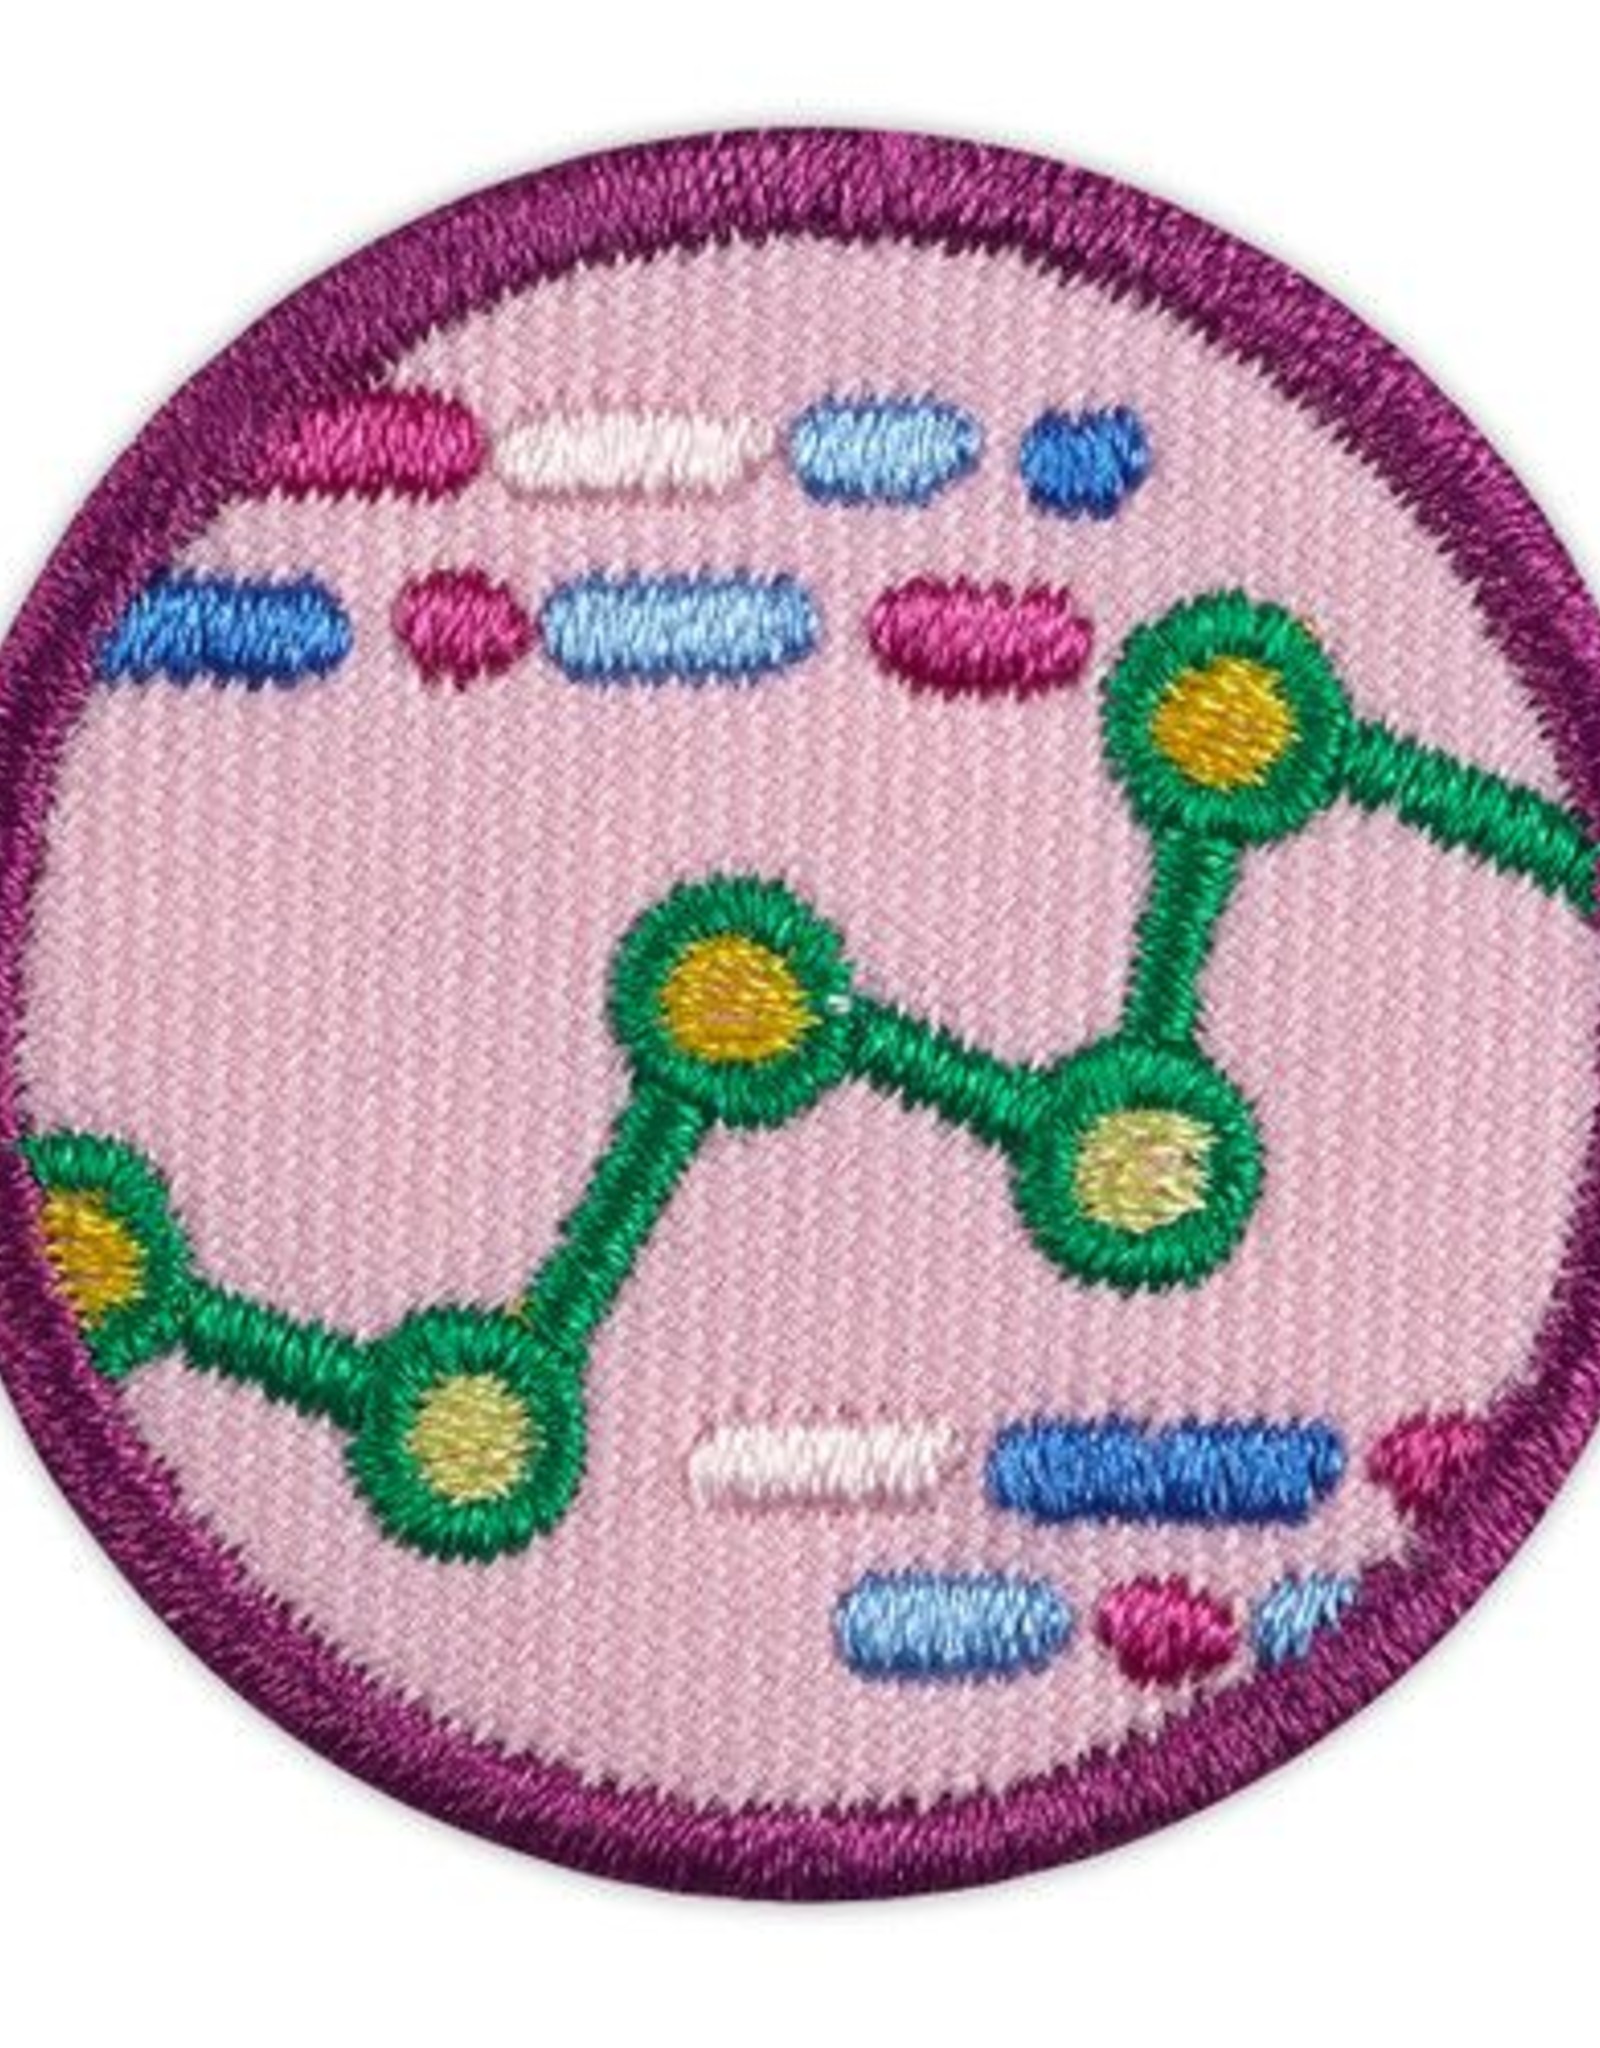 GIRL SCOUTS OF THE USA Junior Think Like a Programmer Computer Science Journey Award Badge